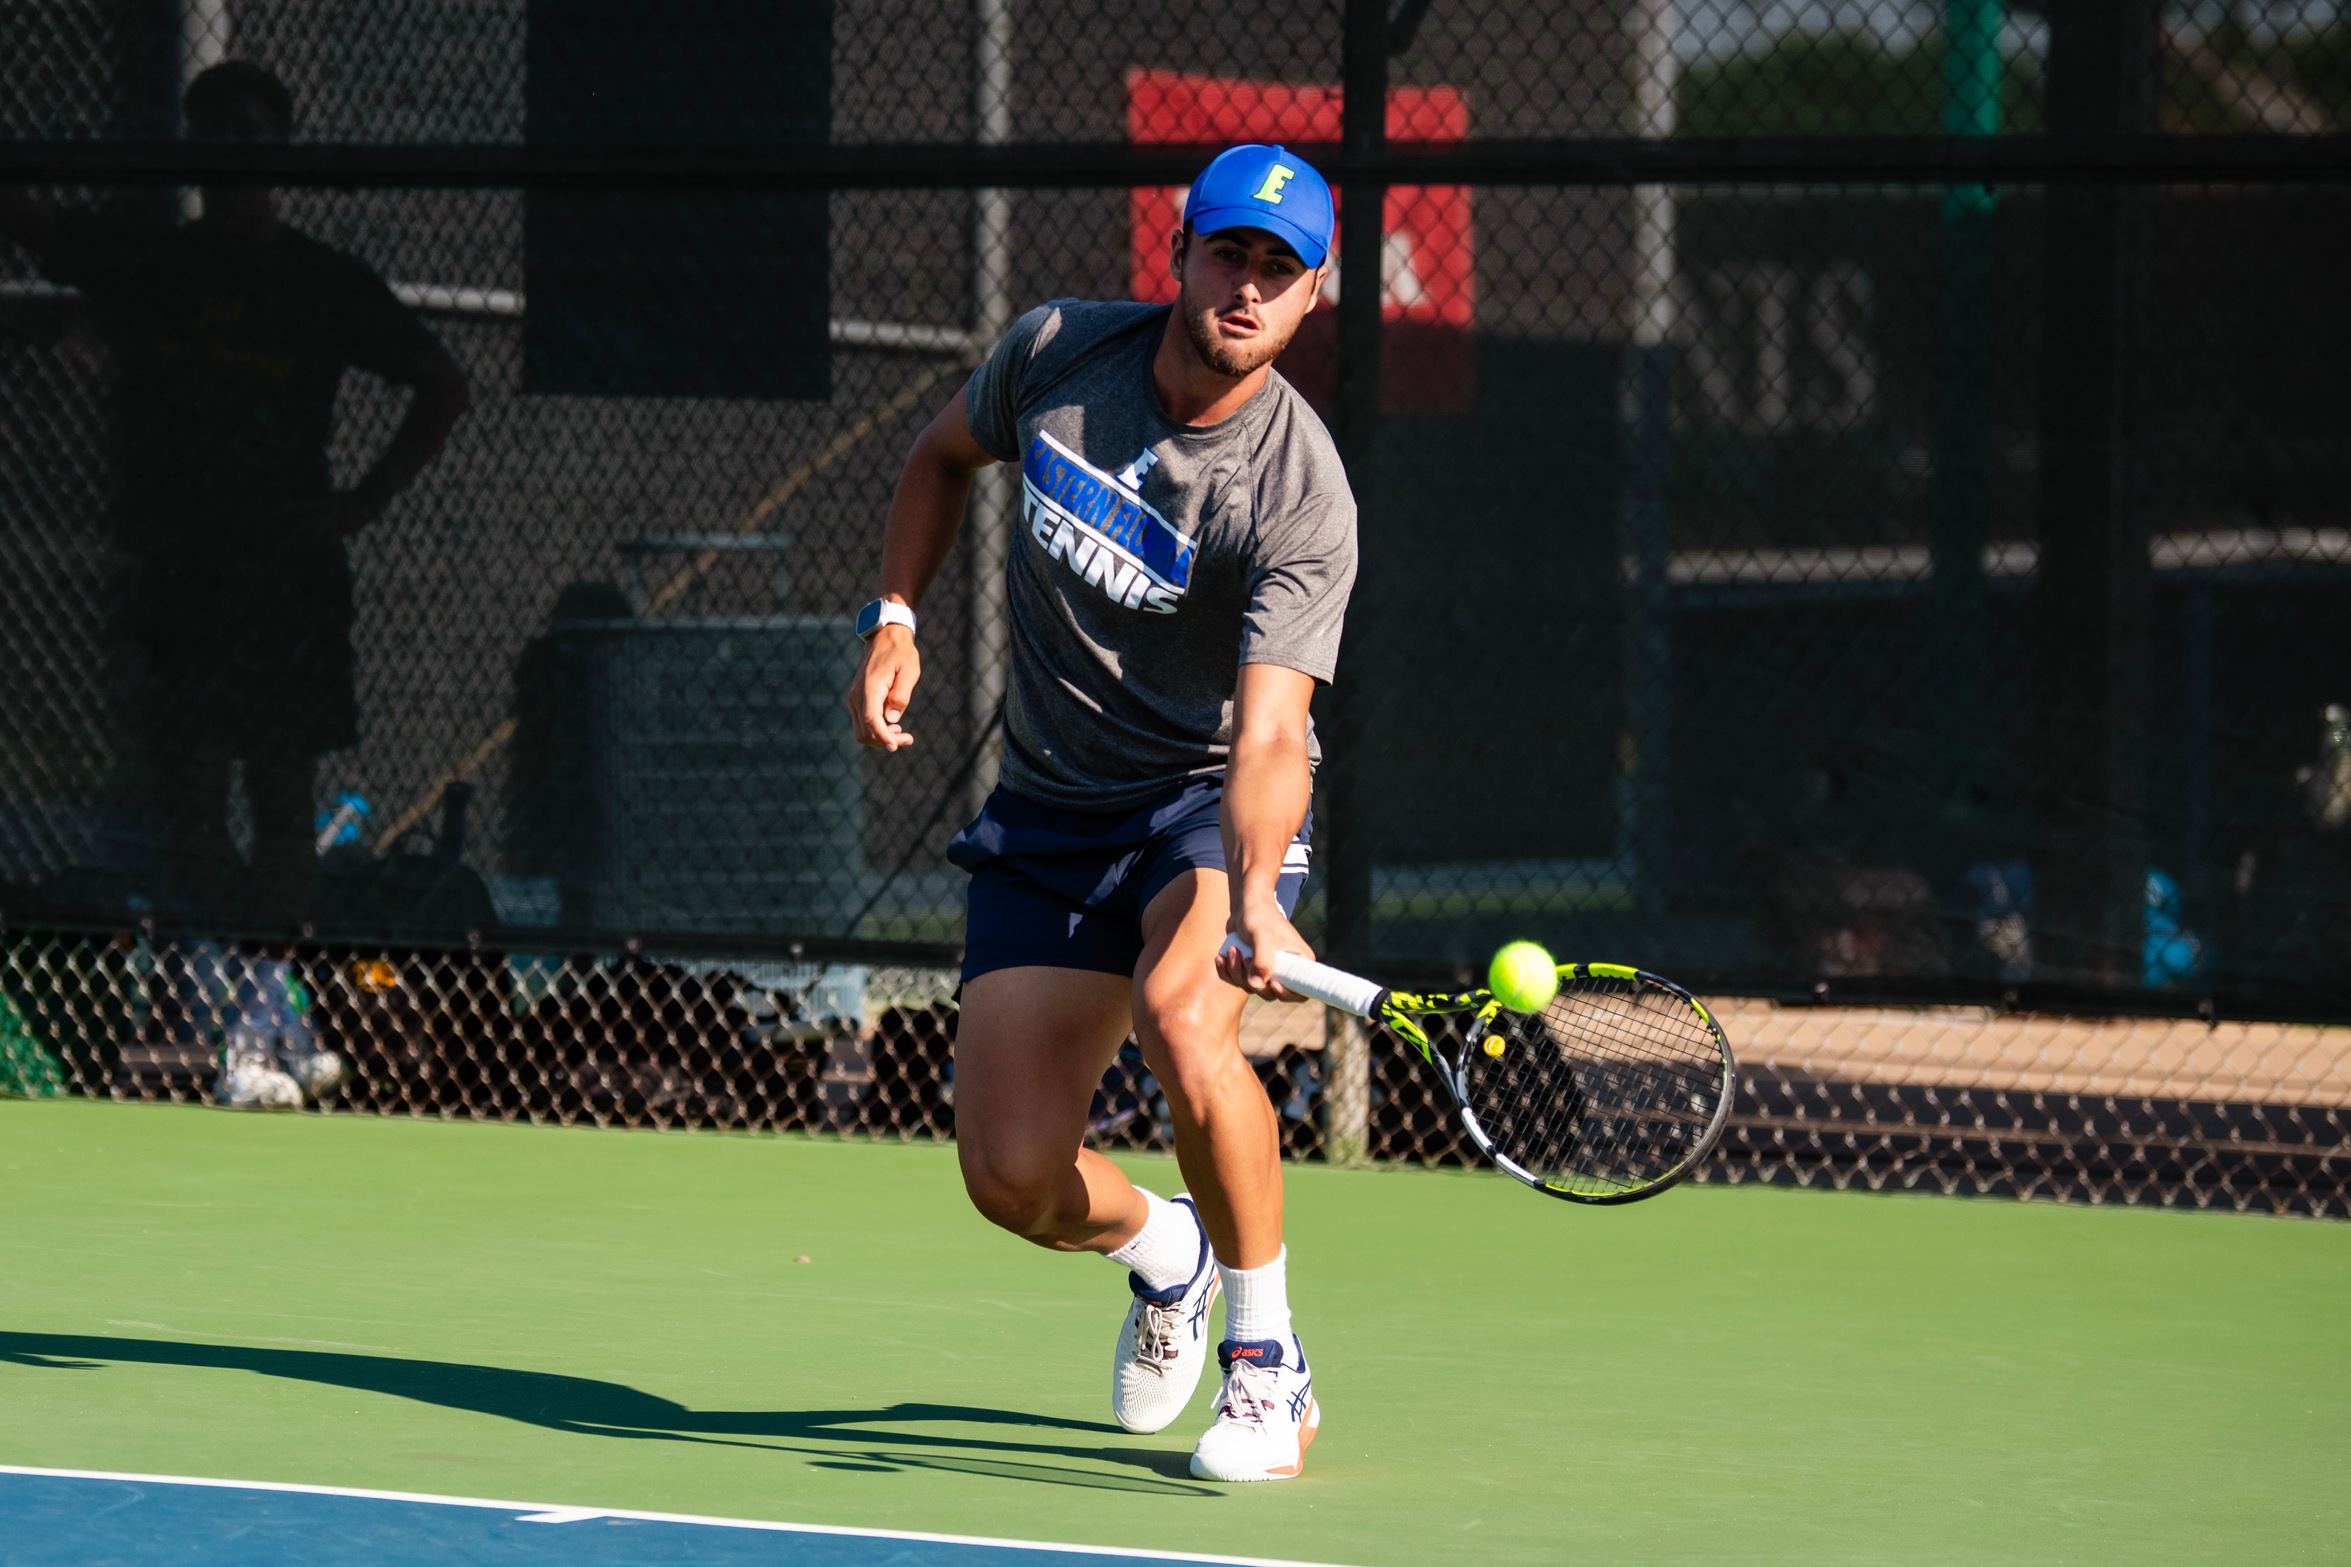 Men's tennis team in third place at national tournament